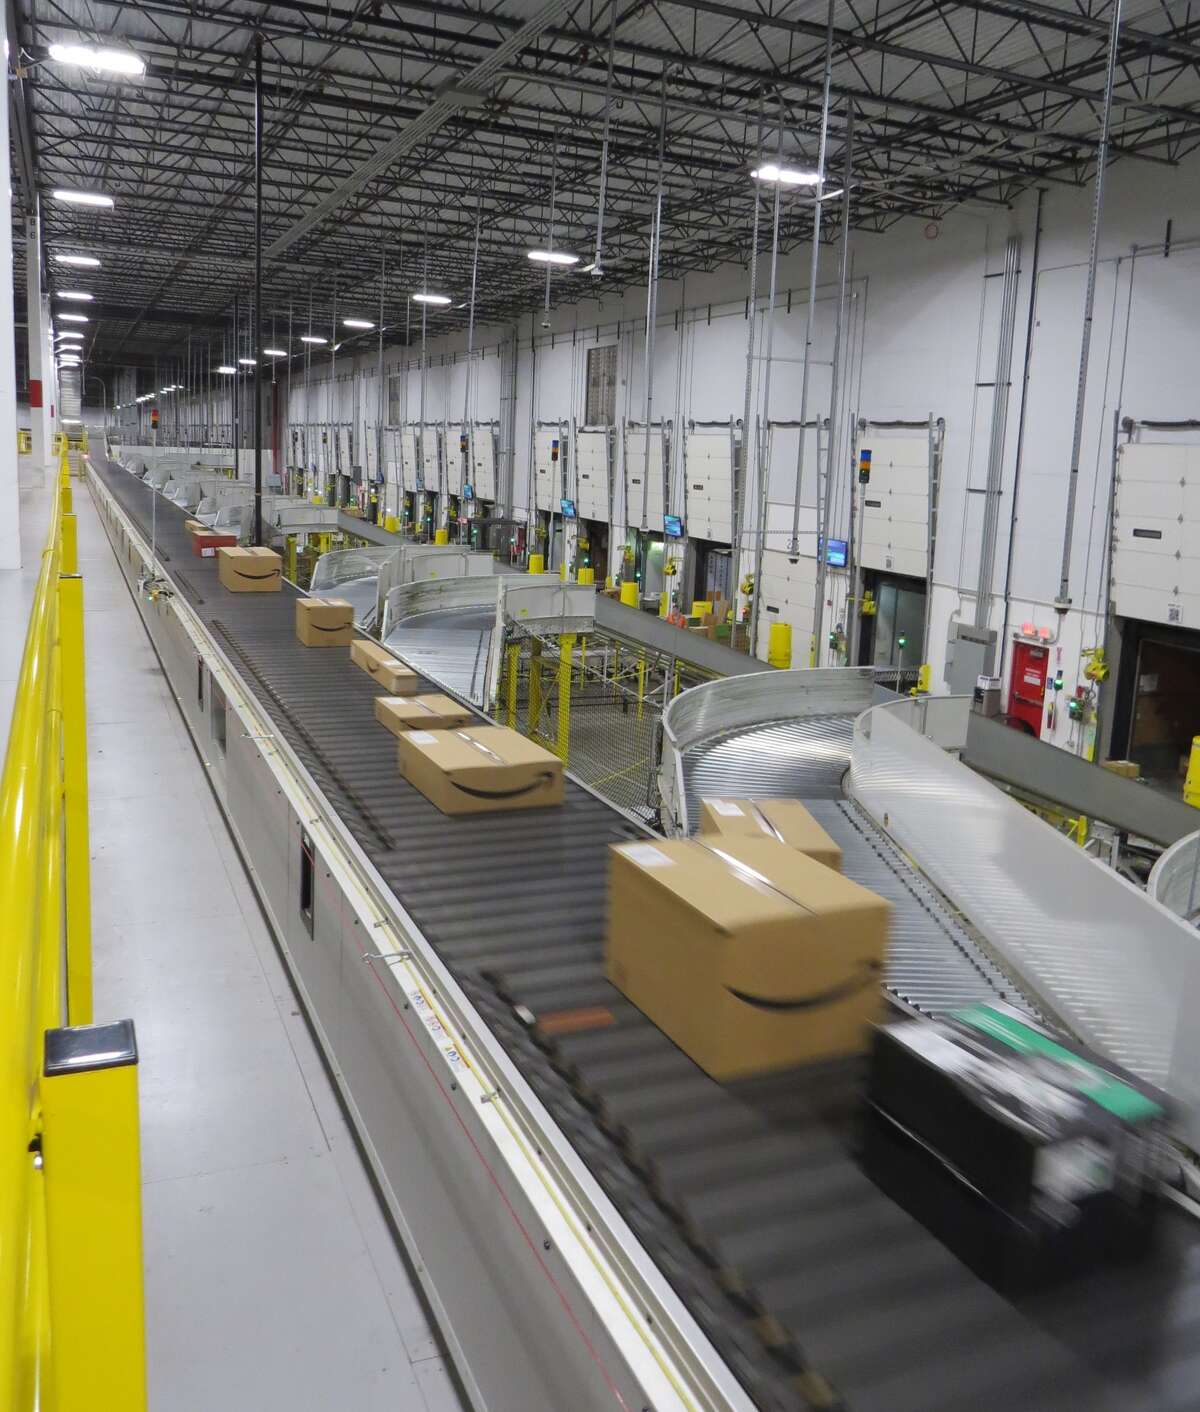 Pictured are packages being prepped at the Edwardsville Amazon Fulfillment Center.